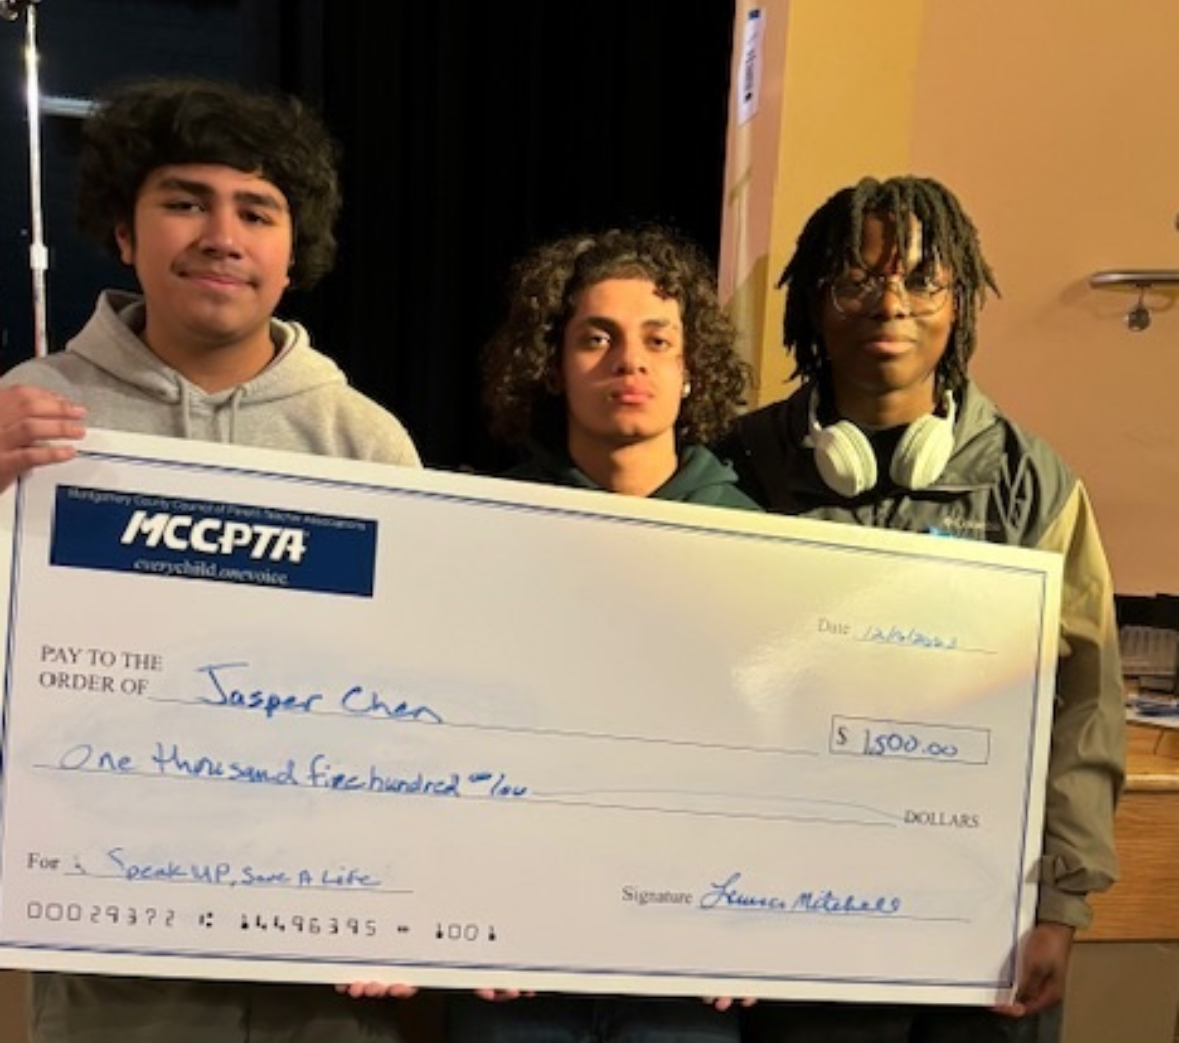 Watkins Mill High School students won an award for their videos, “Dangers Of Fentanyl - FOREVER 16:” I Didn’t Want to Look Lame.”